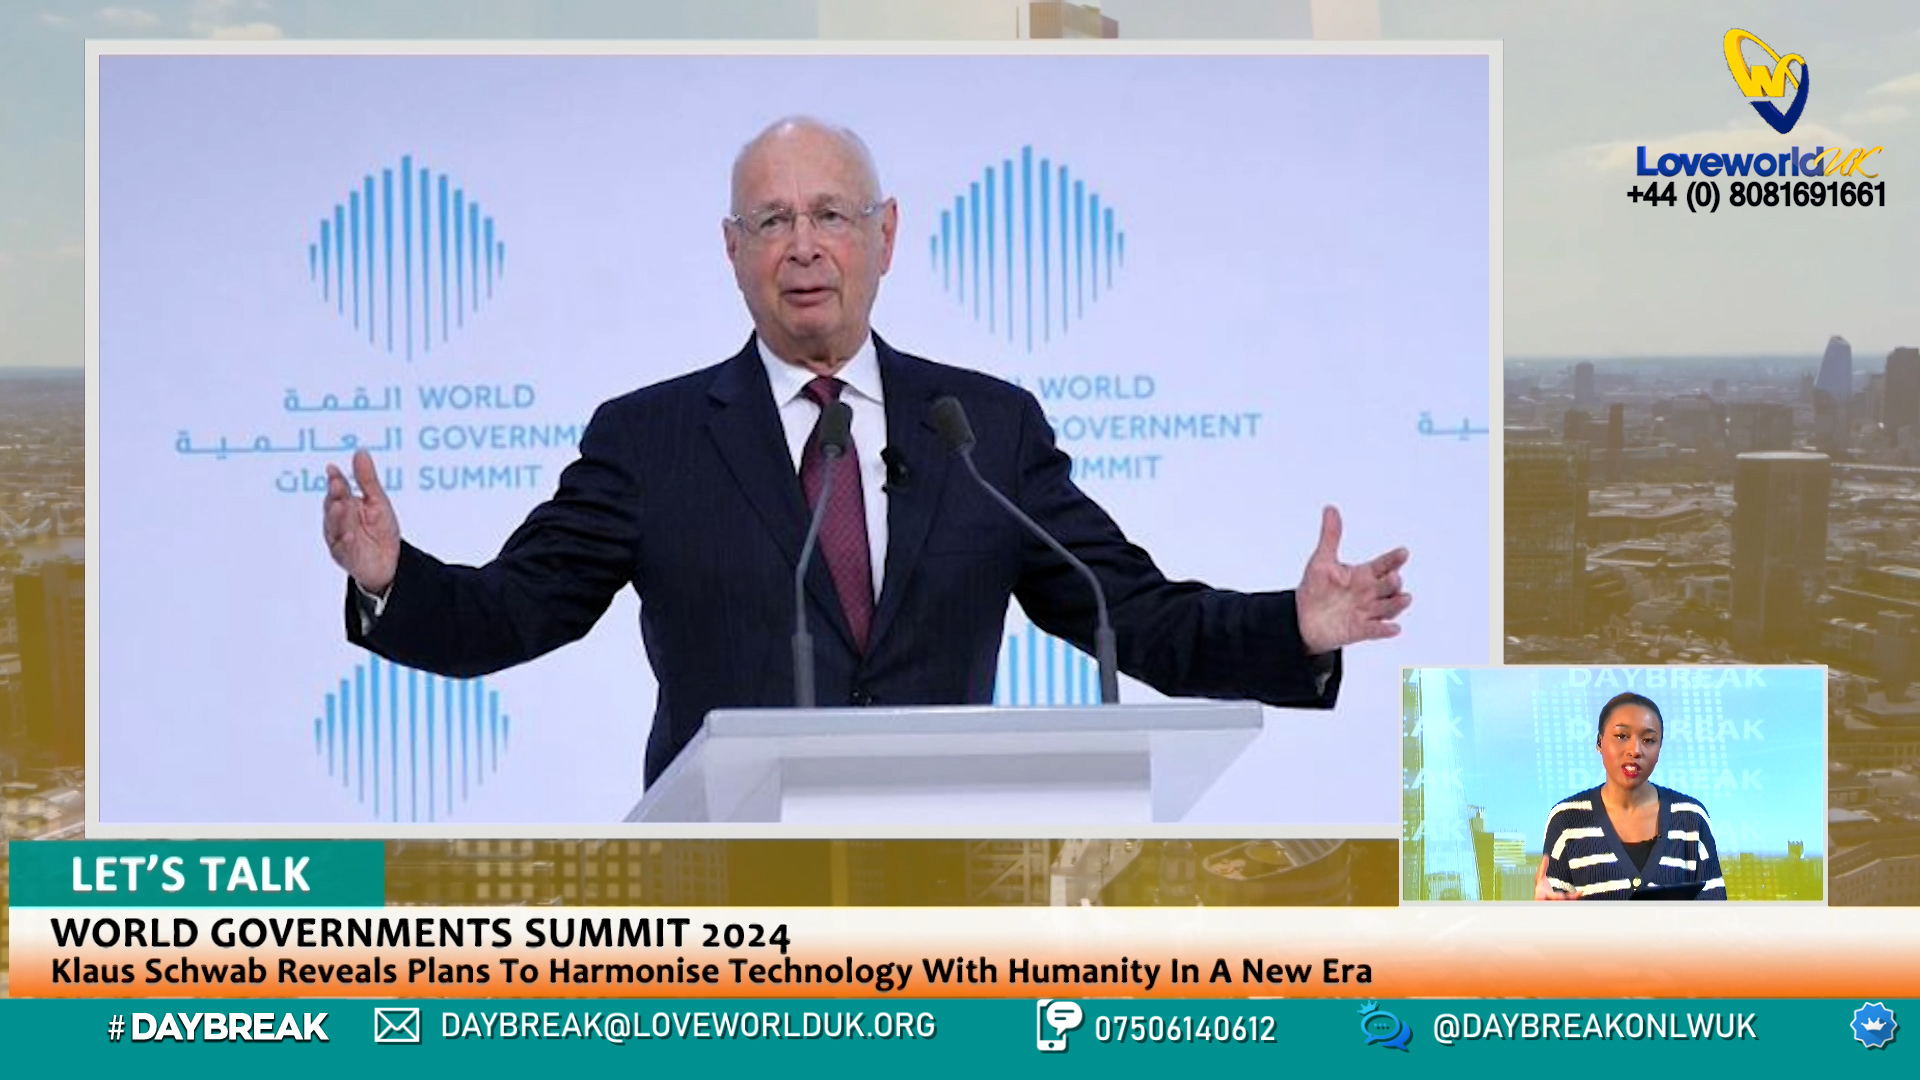 EP 25 - WORLD GOVERNMENTS SUMMIT 2024 - Klaus Schwab Reveals Plans To Harmonise Technology With Humanity In A New Era 